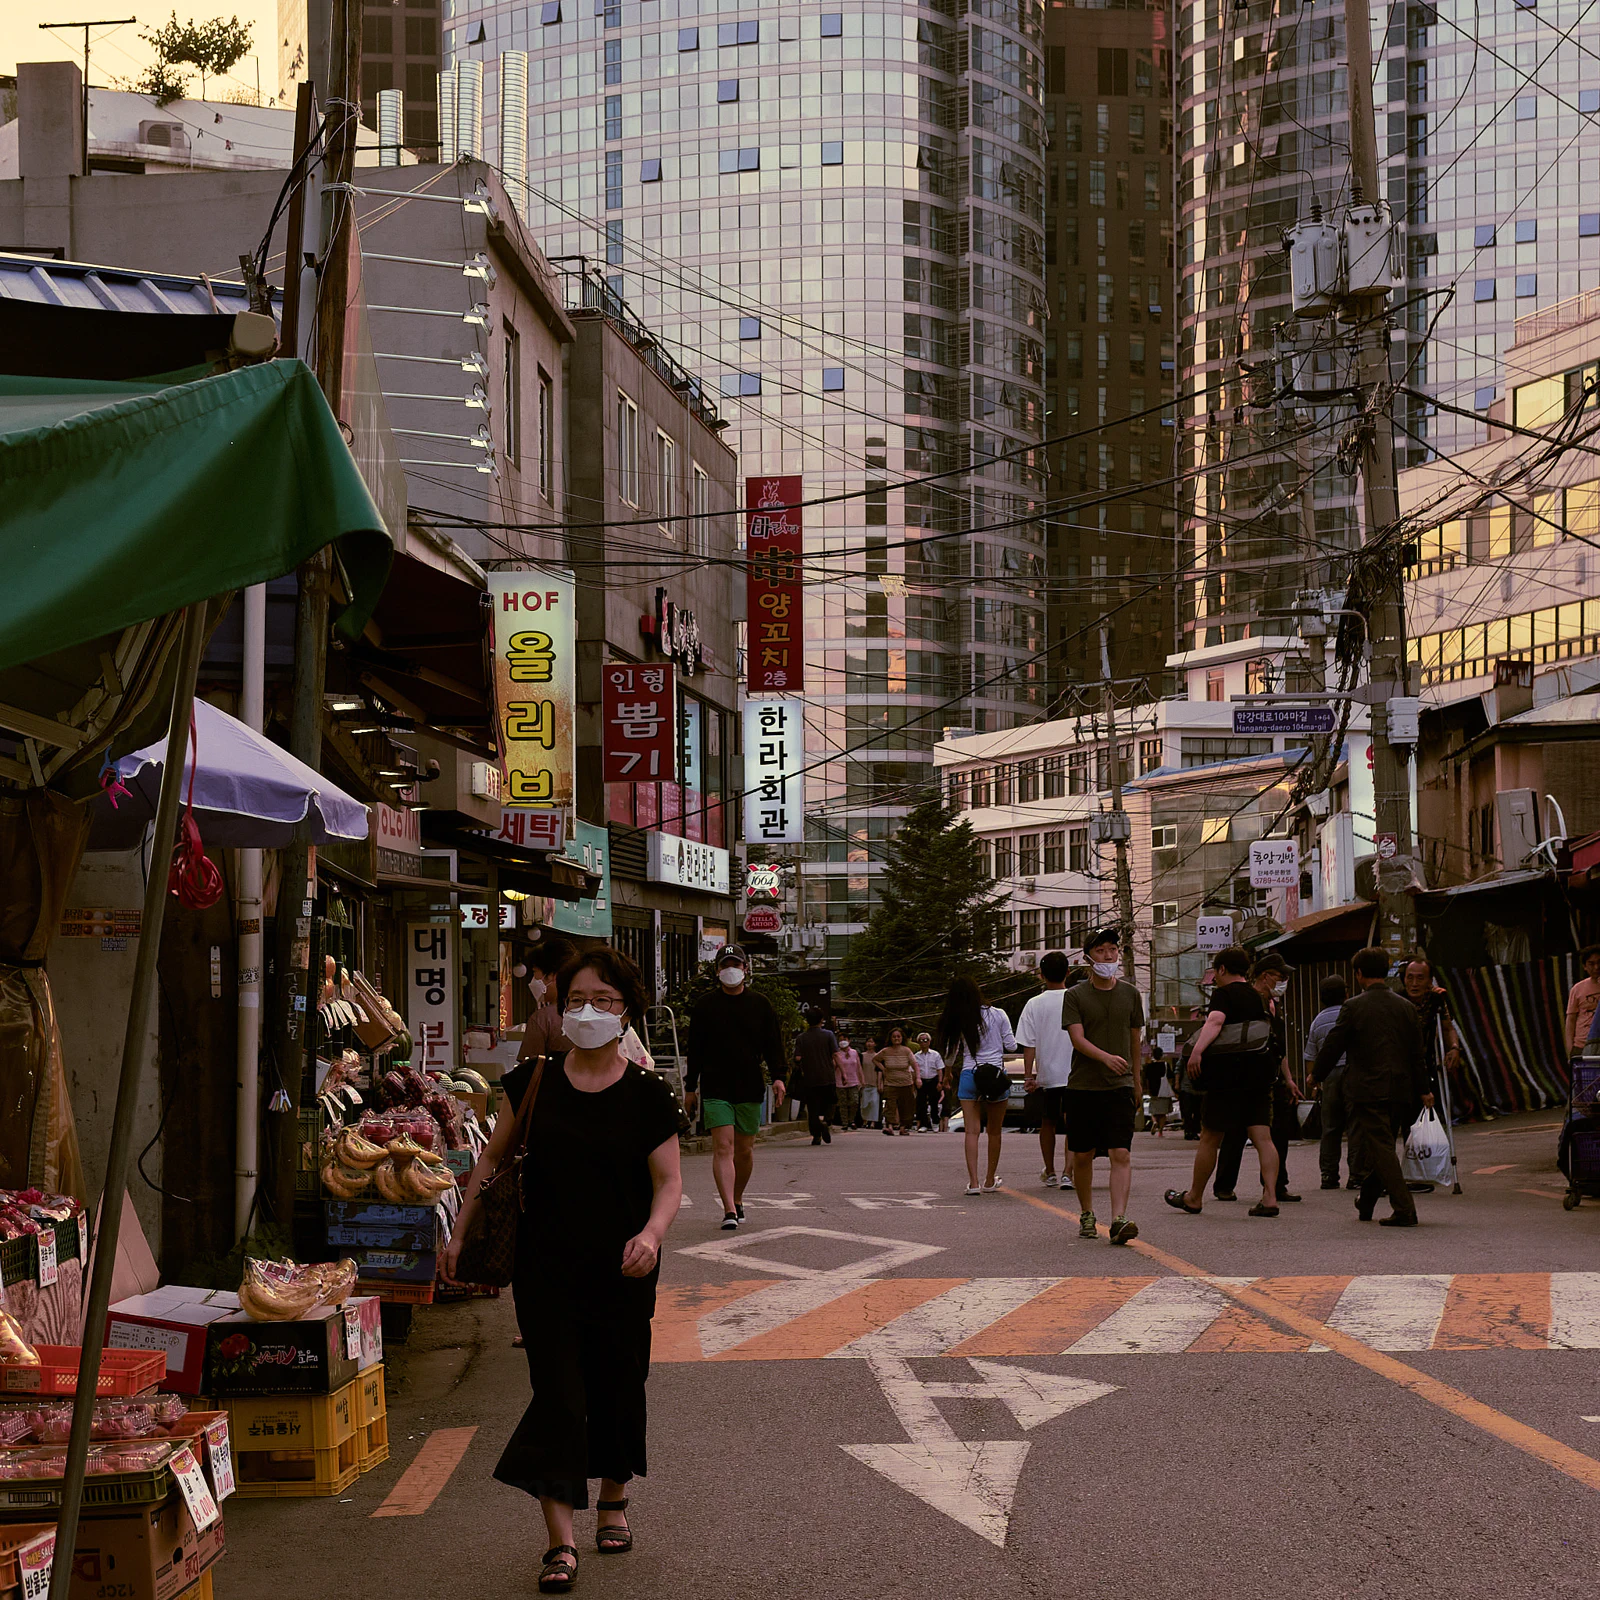 Seoul's modern cityscape layered with grittier, older historic homes.